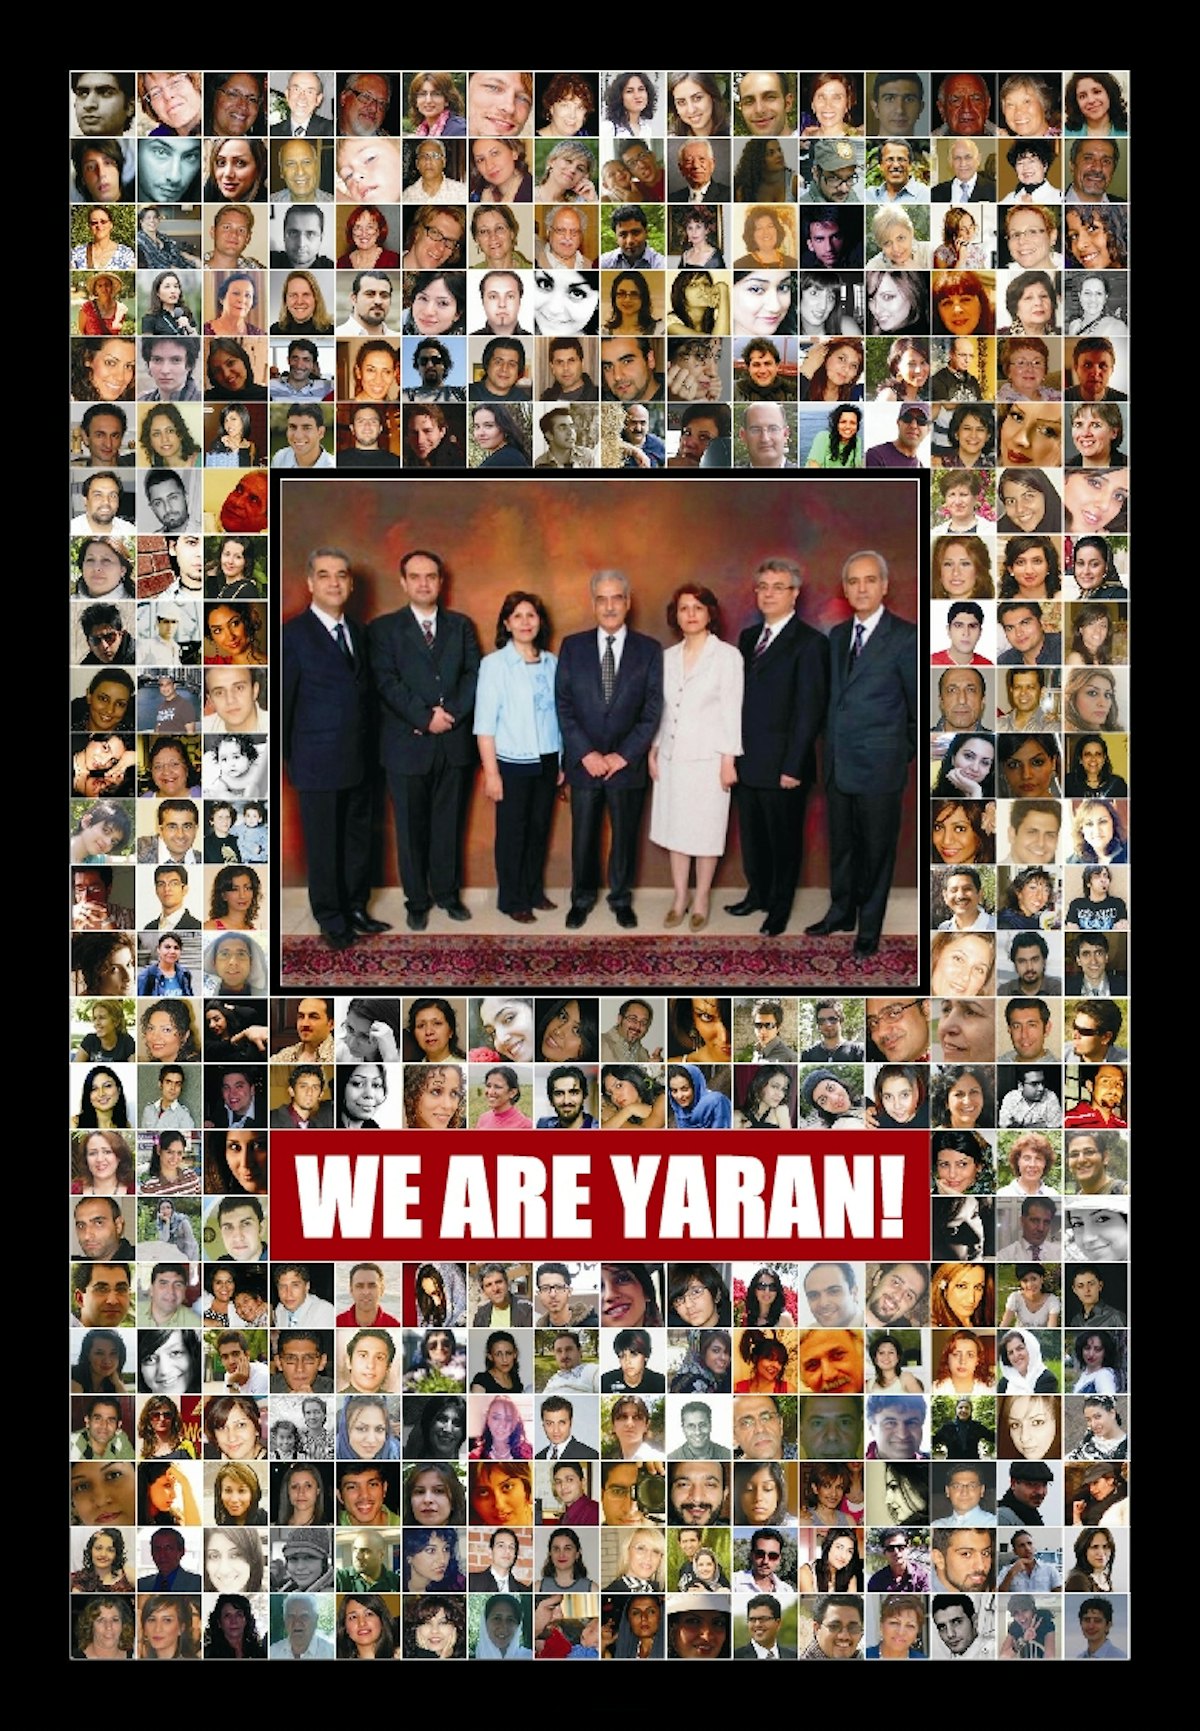 A design created by the Human Rights Activists News Agency features a photograph taken of the seven imprisoned Baha'i leaders before they were arrested. Around it are the faces of some of the HRANA campaign's supporters, accompanied by the slogan, "We are Yaran!" - "We are Friends!"